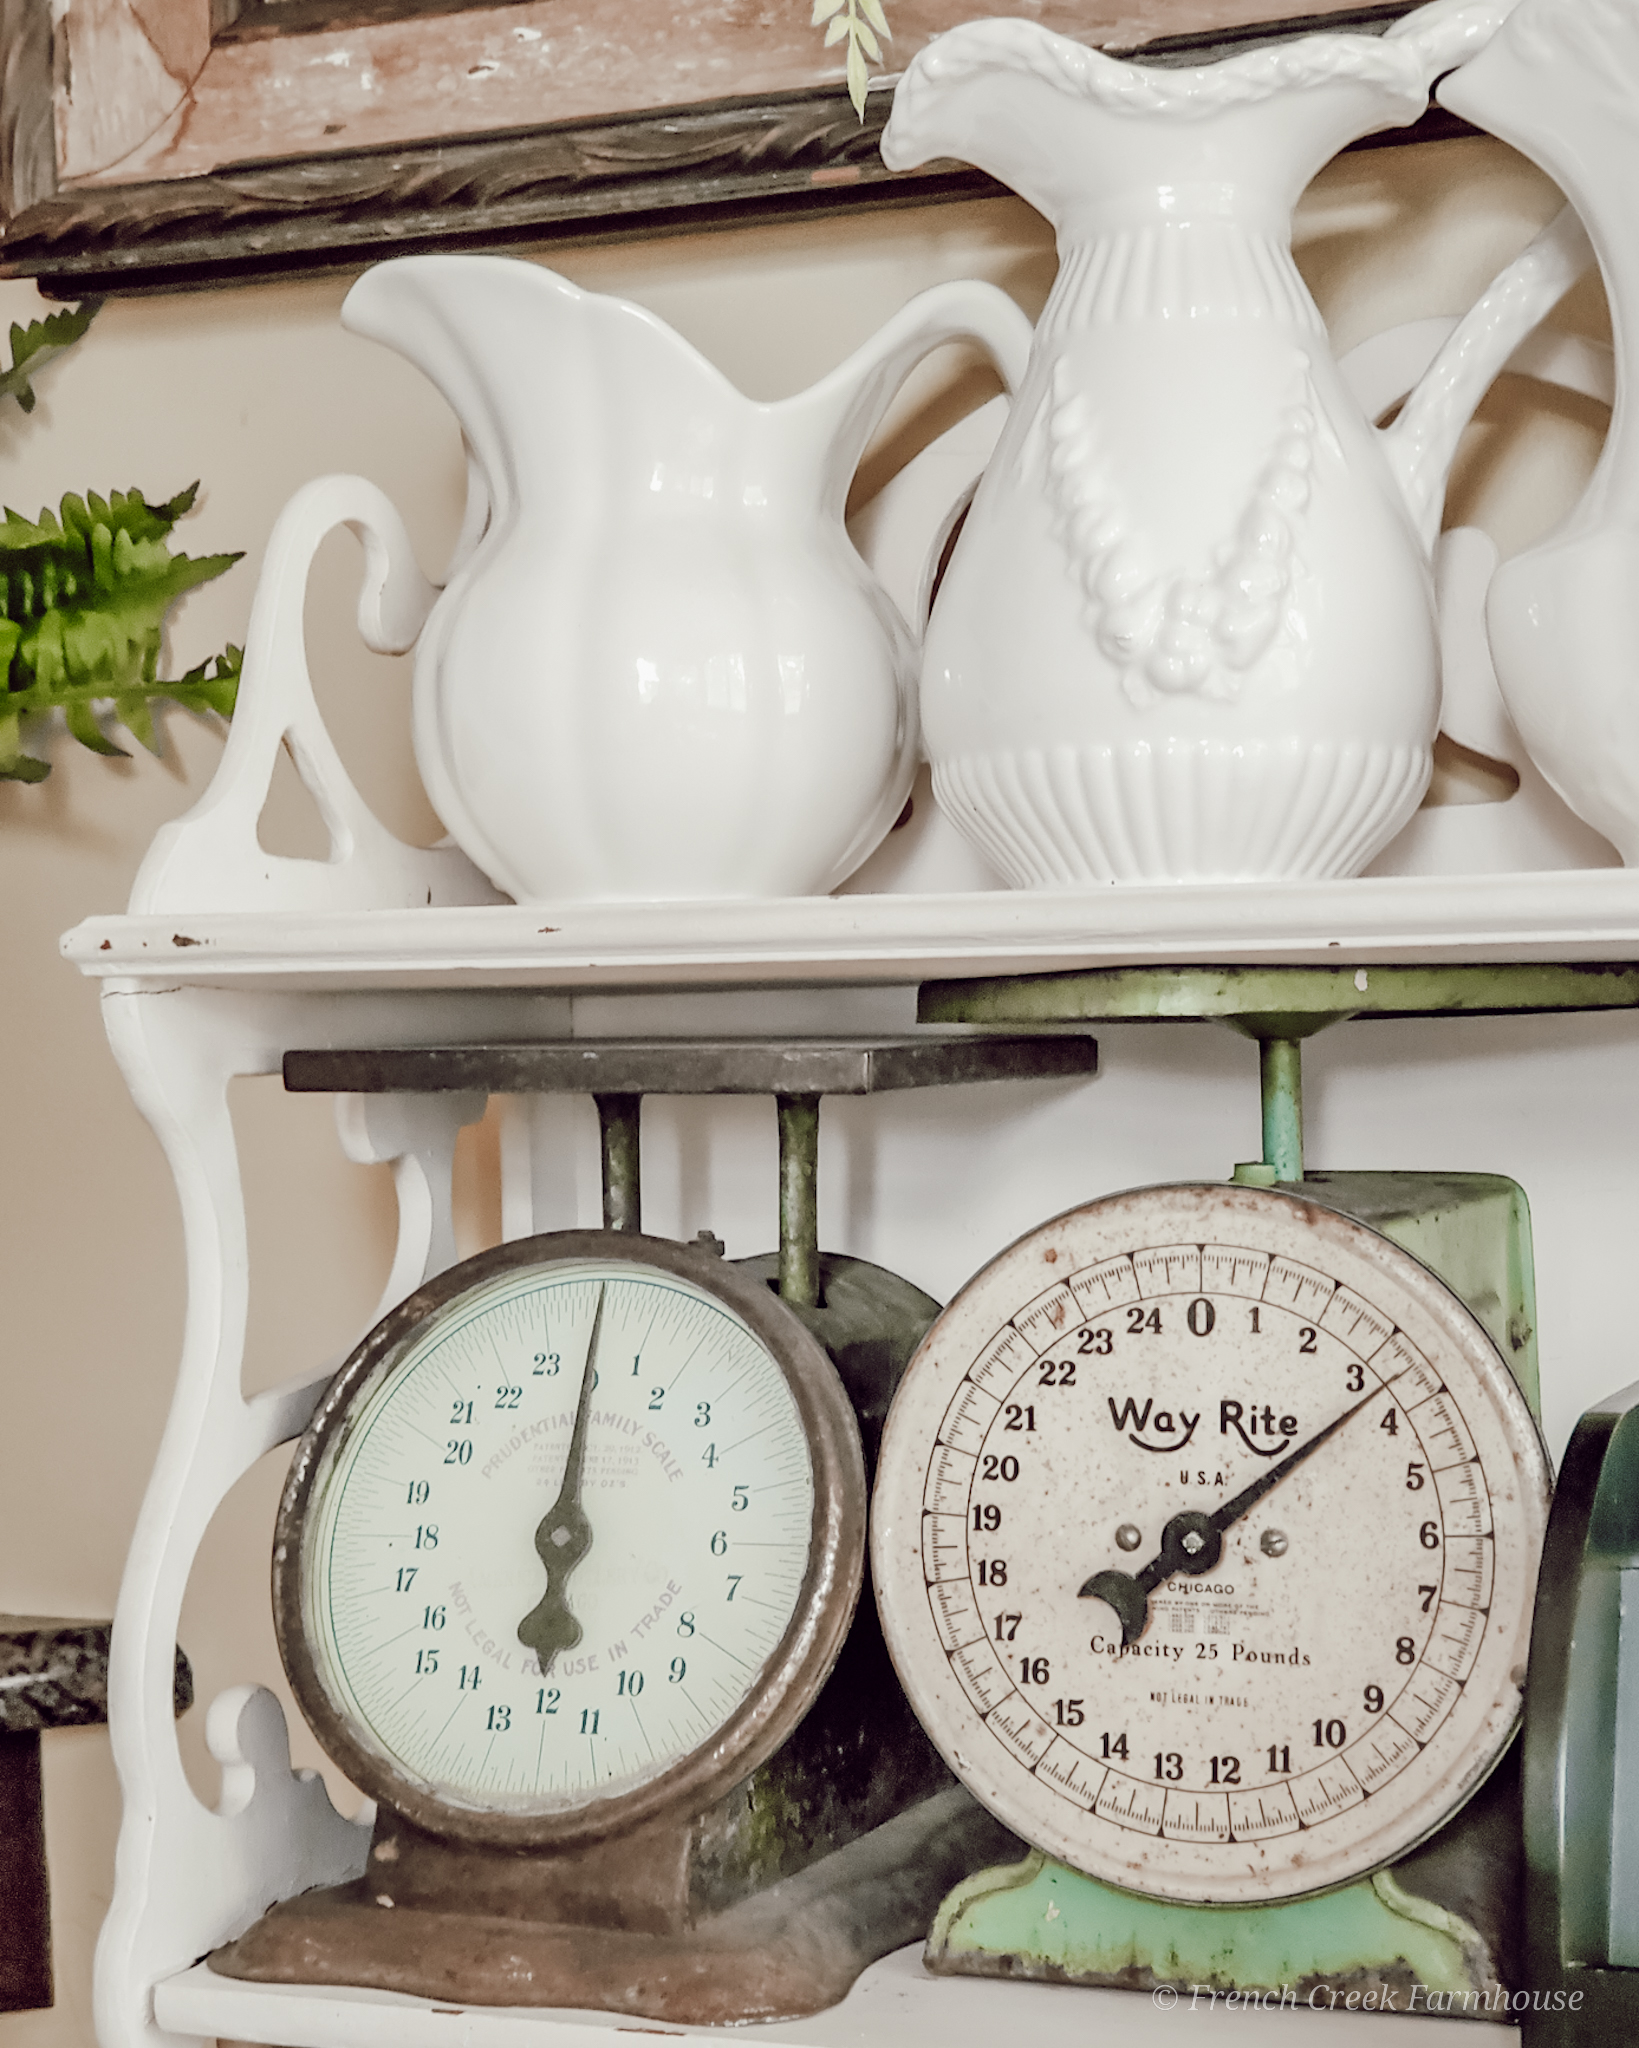 Vintage scales make beautiful kitchen or dining decor